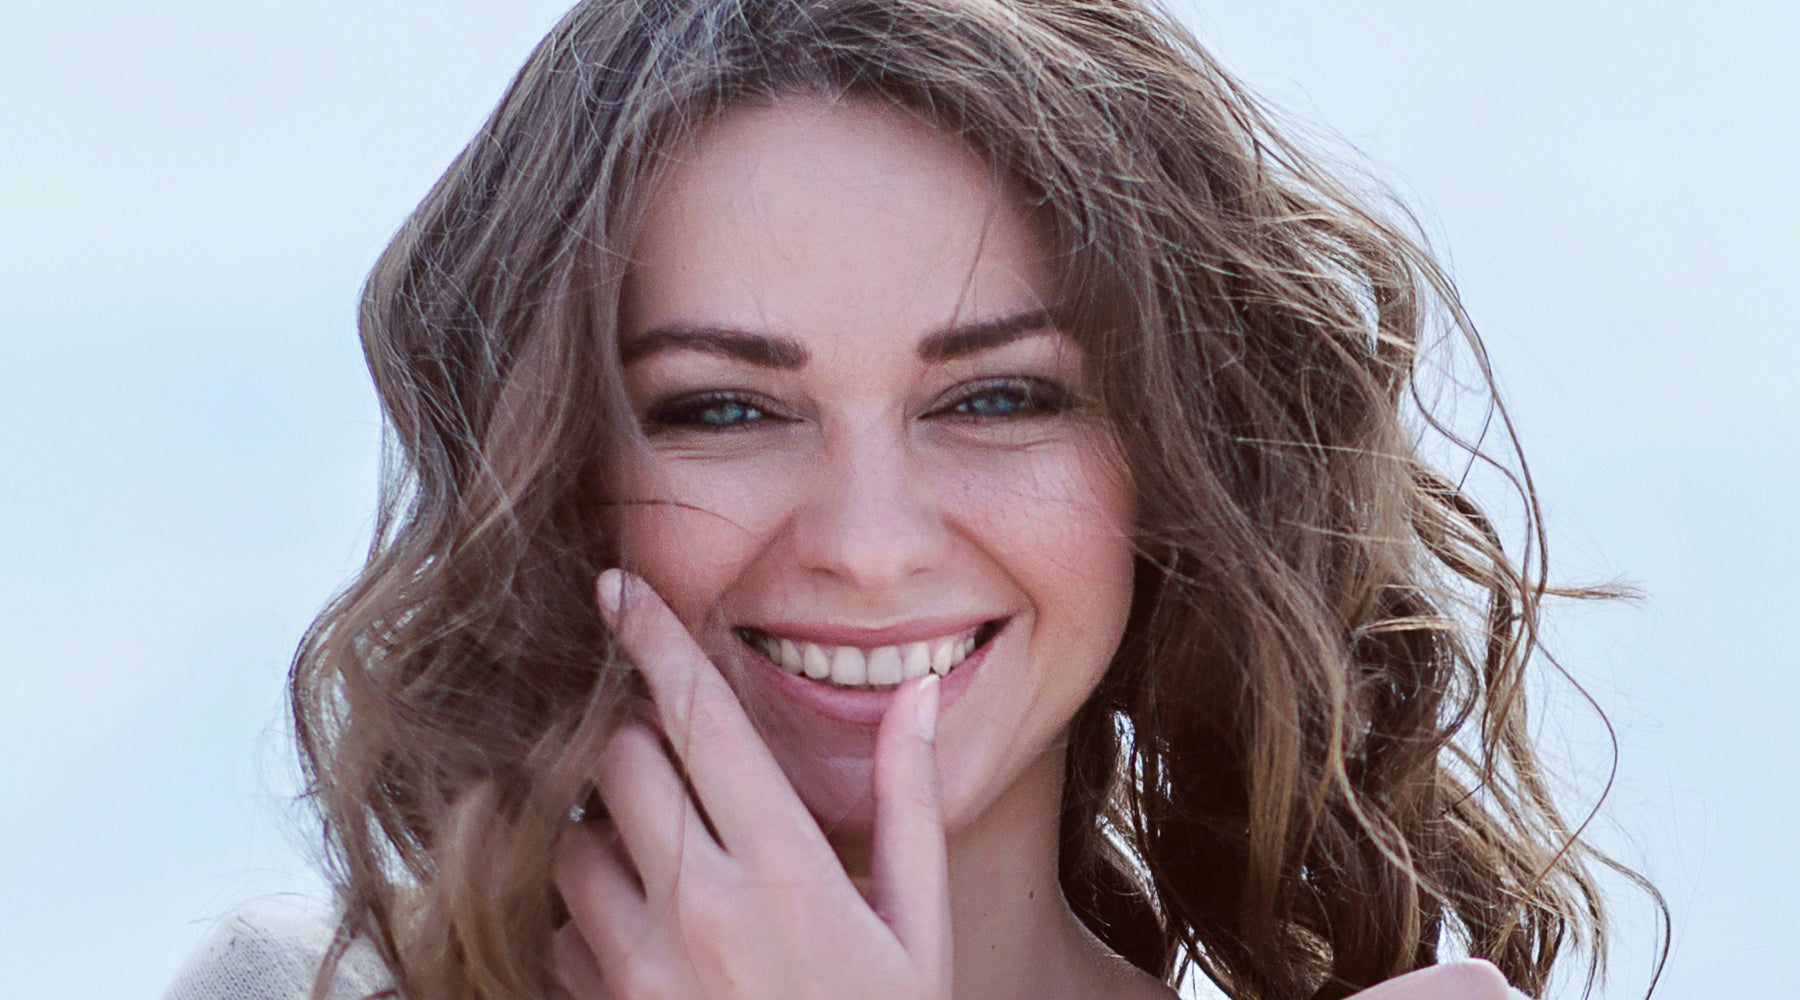 Smiling woman with hand touching face